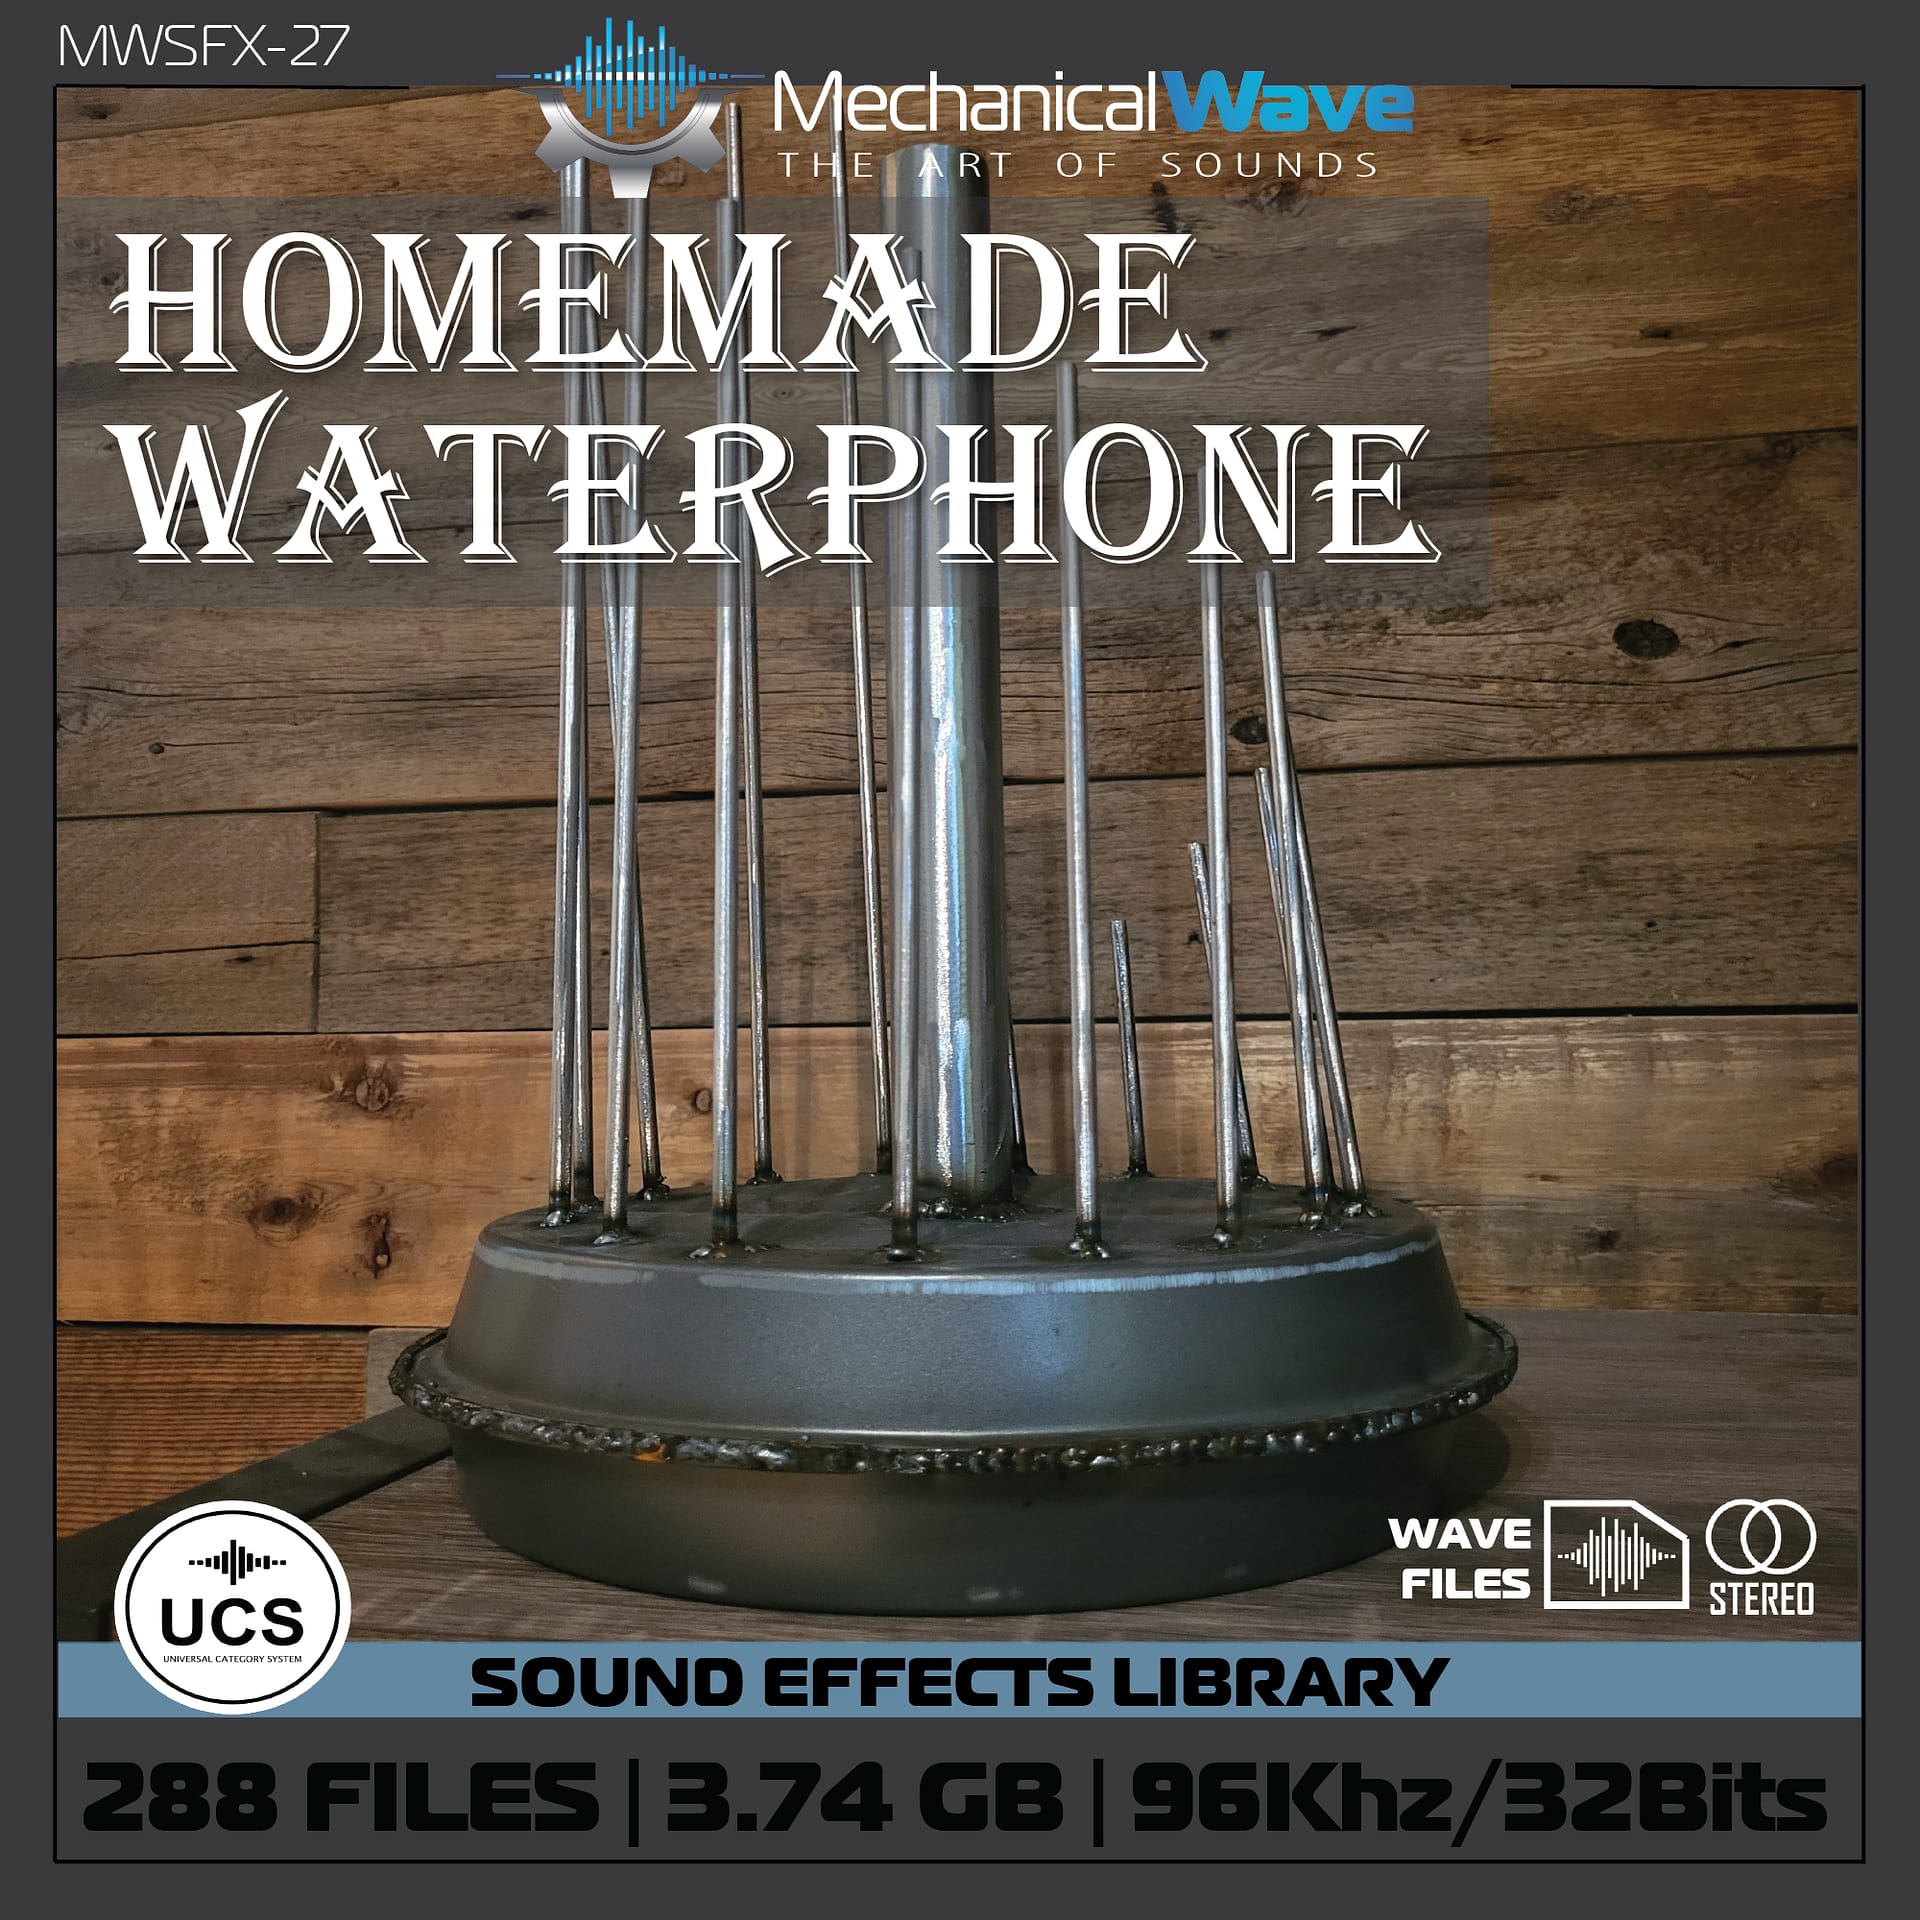 Homemade-Waterphone_SquareCOVER_24-R-01